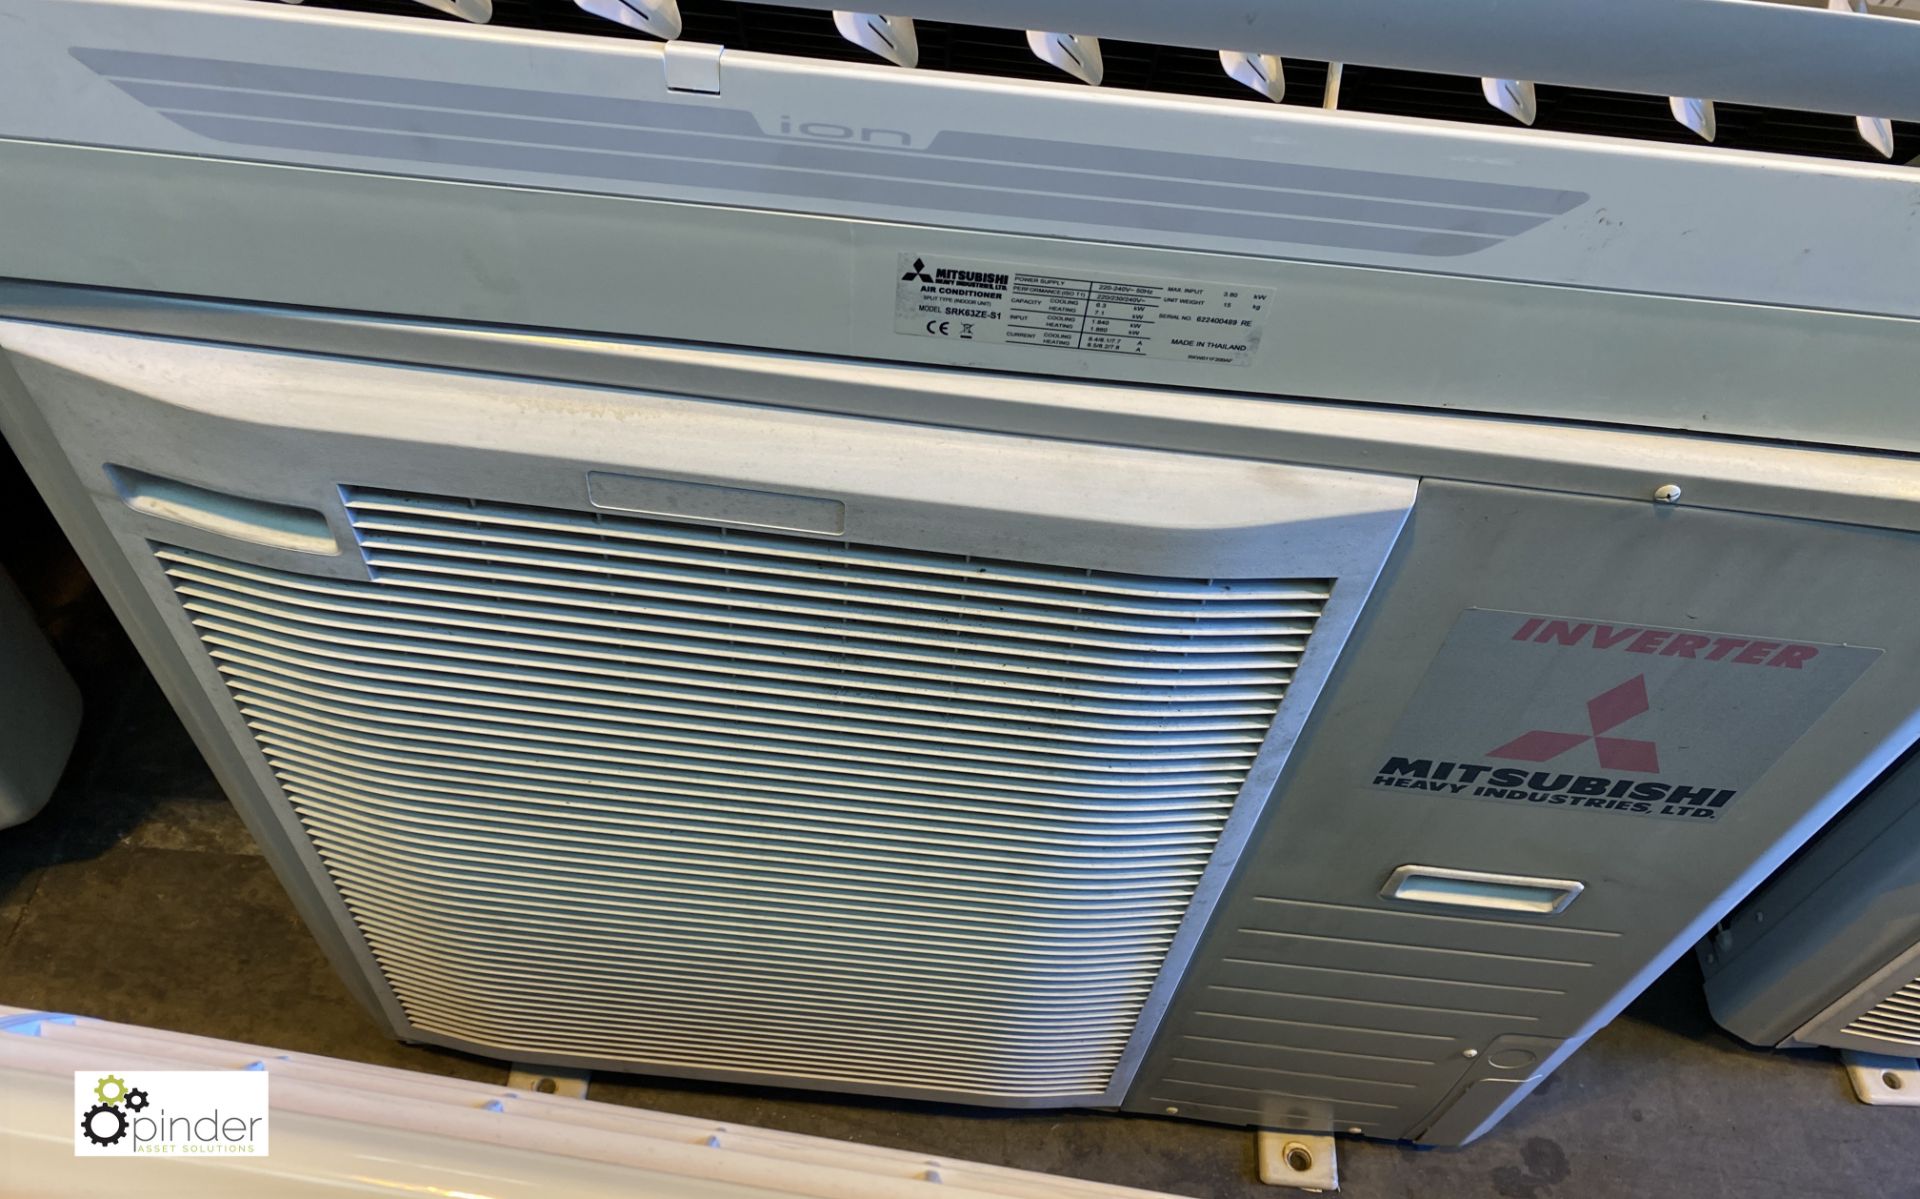 Mitsubishi SRC63ZE-S1 Air Conditioning Unit, with Mitsubishi SRK63ZE-S wall mounted inverter - Image 2 of 5